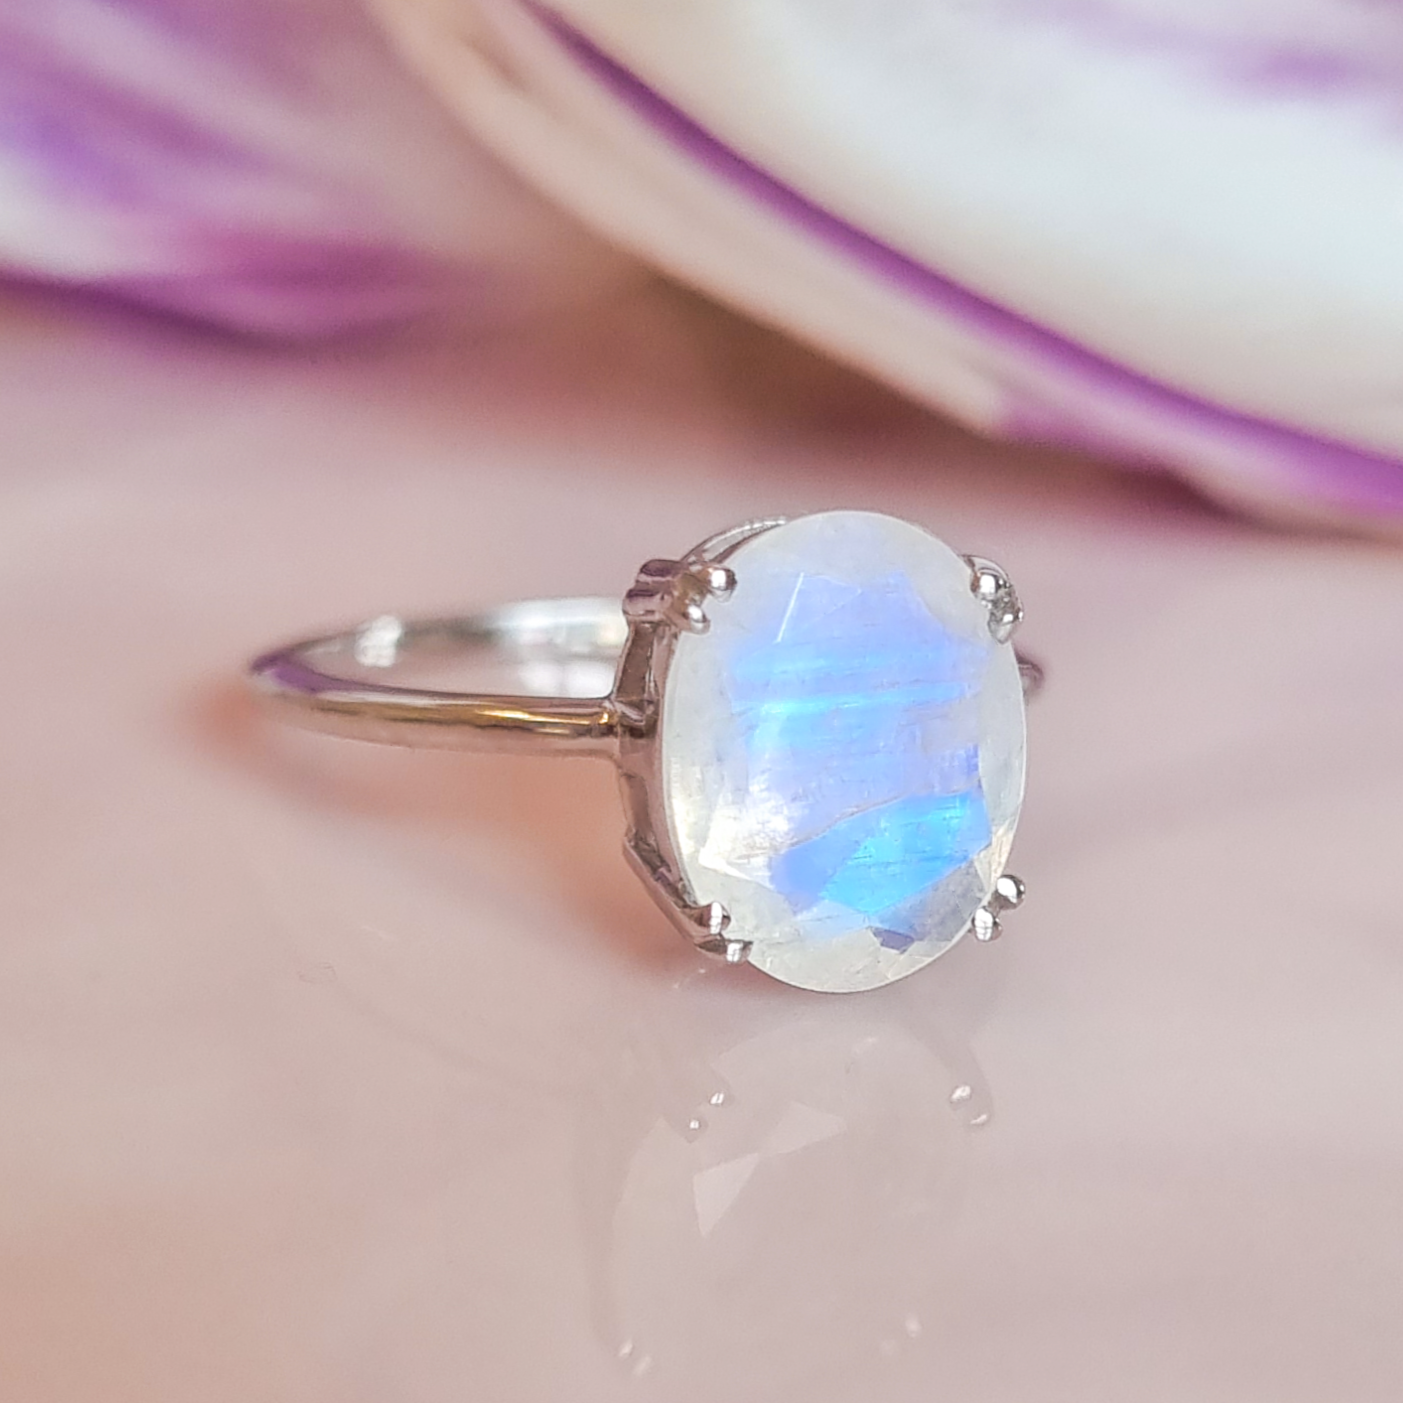 Sterling Silver Oval Cut Rainbow Moonstone Ring - Anniversary, Birthday, Mother's Day Gift for her, Engagement, Gemstone Ring